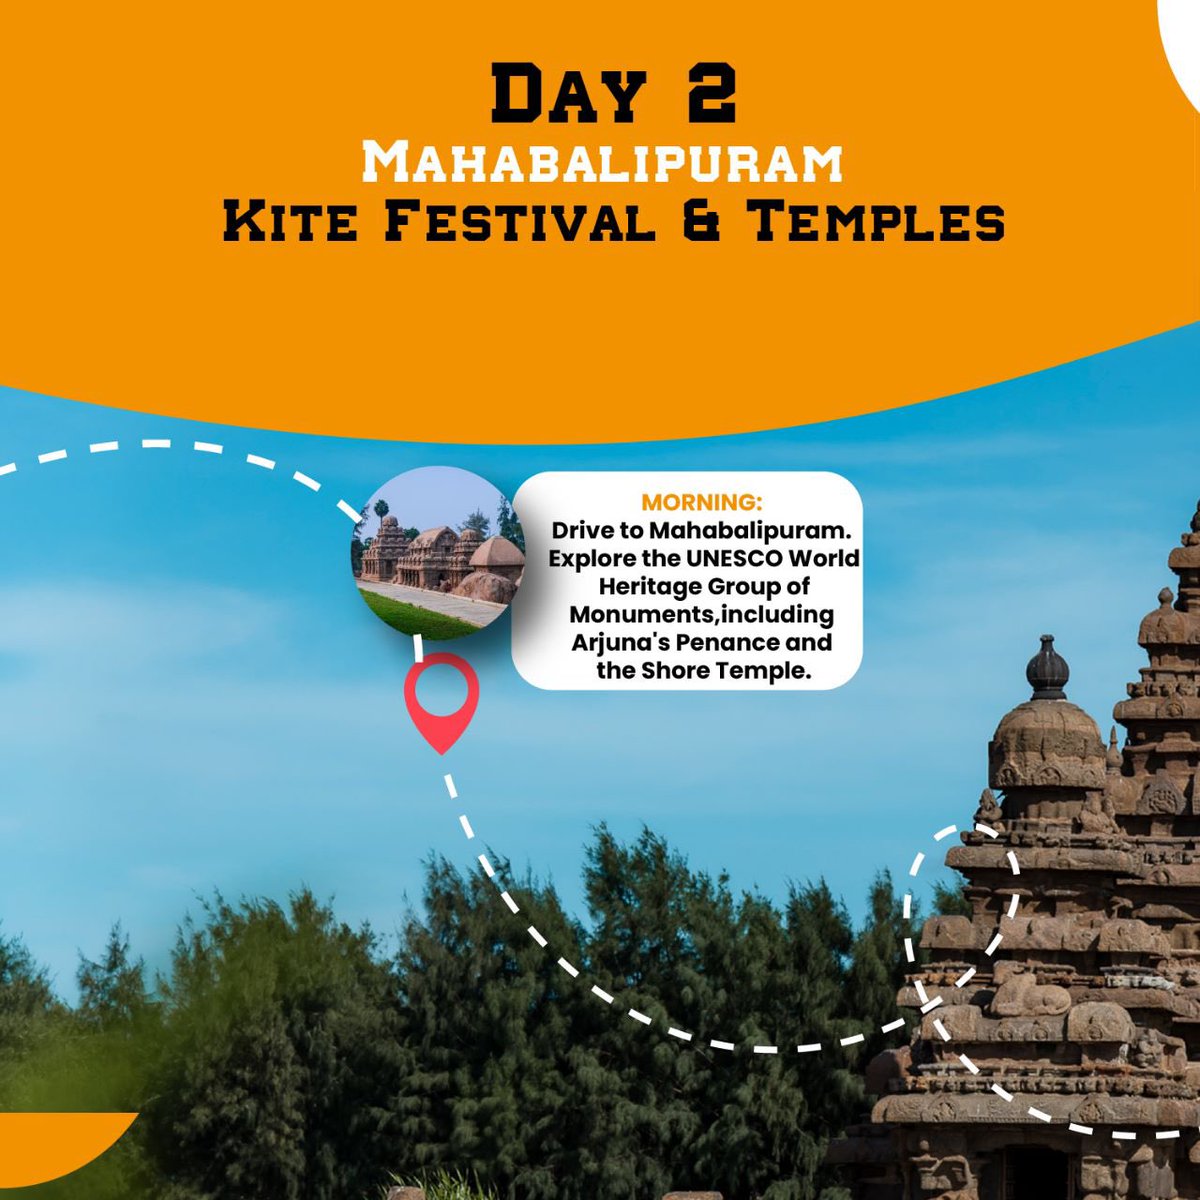 Embrace the perfect blend of culture and nature on a 3-day escapade from Chennai to Mahabalipuram's vibrant kite festival and the enchanting Jawadhi Hills monsoon retreat!

#tntourism #tamilnadu #daytrip #chennai #tripplanner #tripplanning #madras #explore #wherestoriesneverend